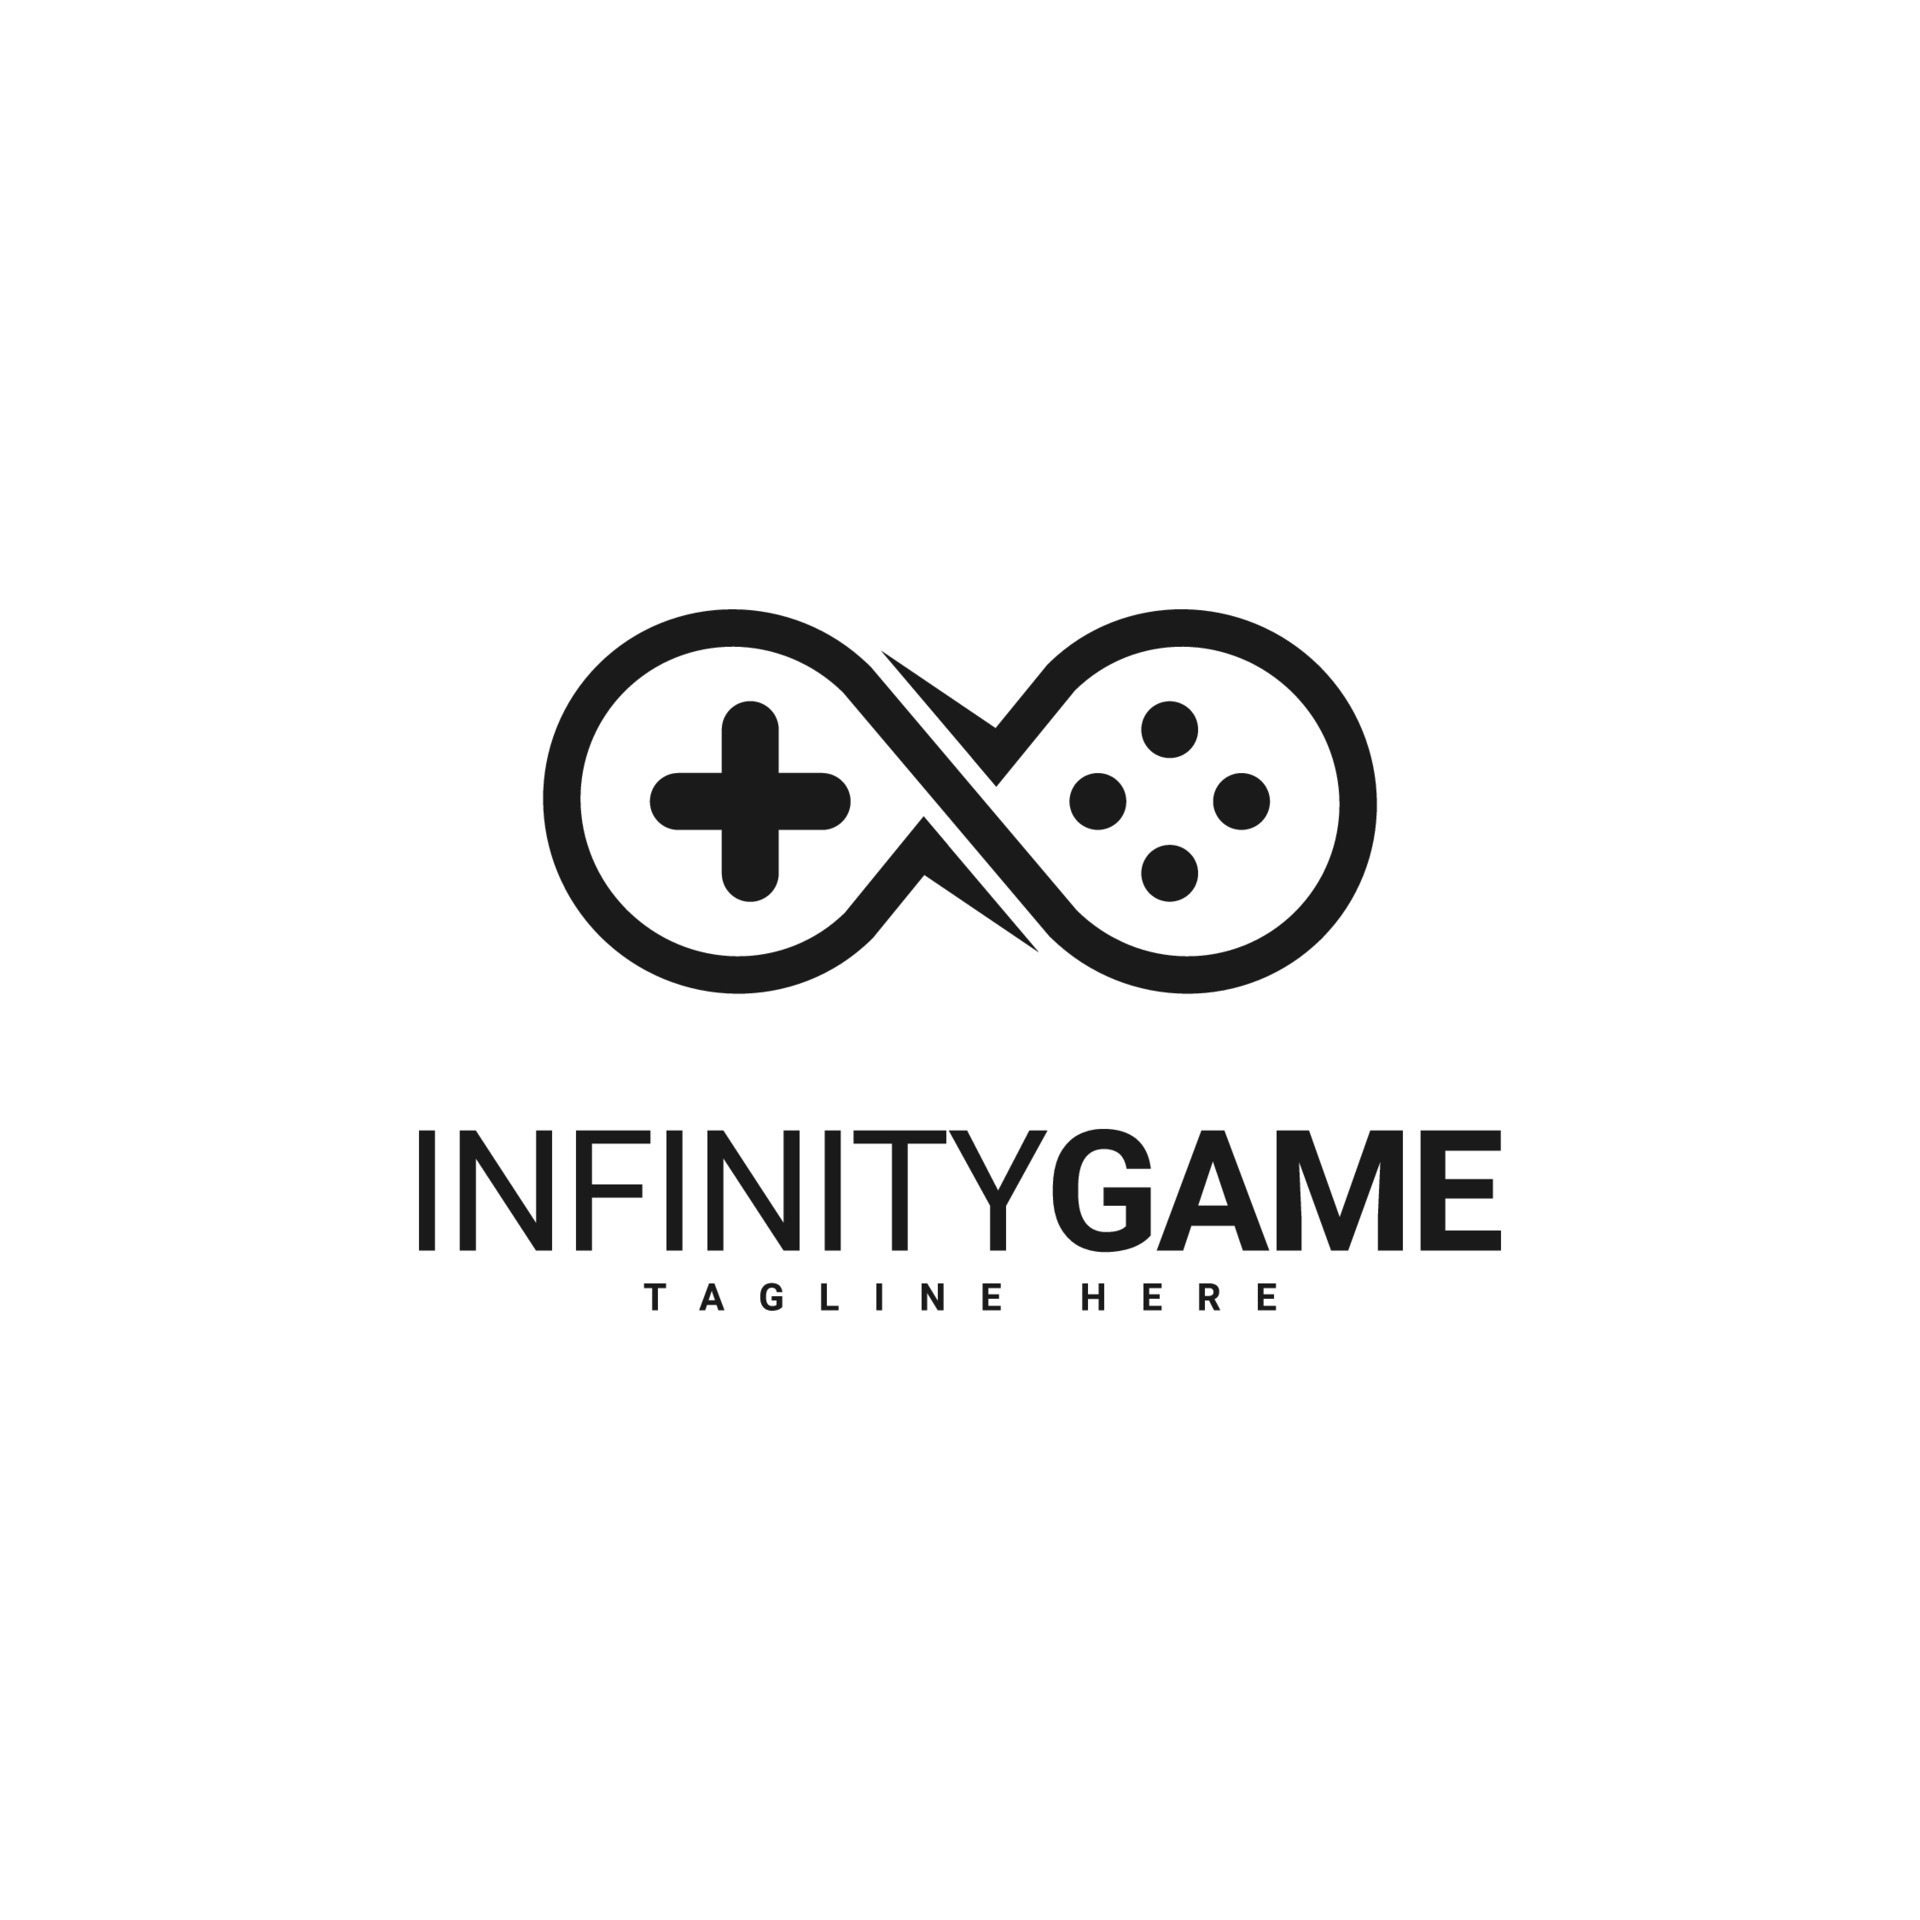 Simple and Clean Infinity Game Logo Design, Suitable for Gamers ...